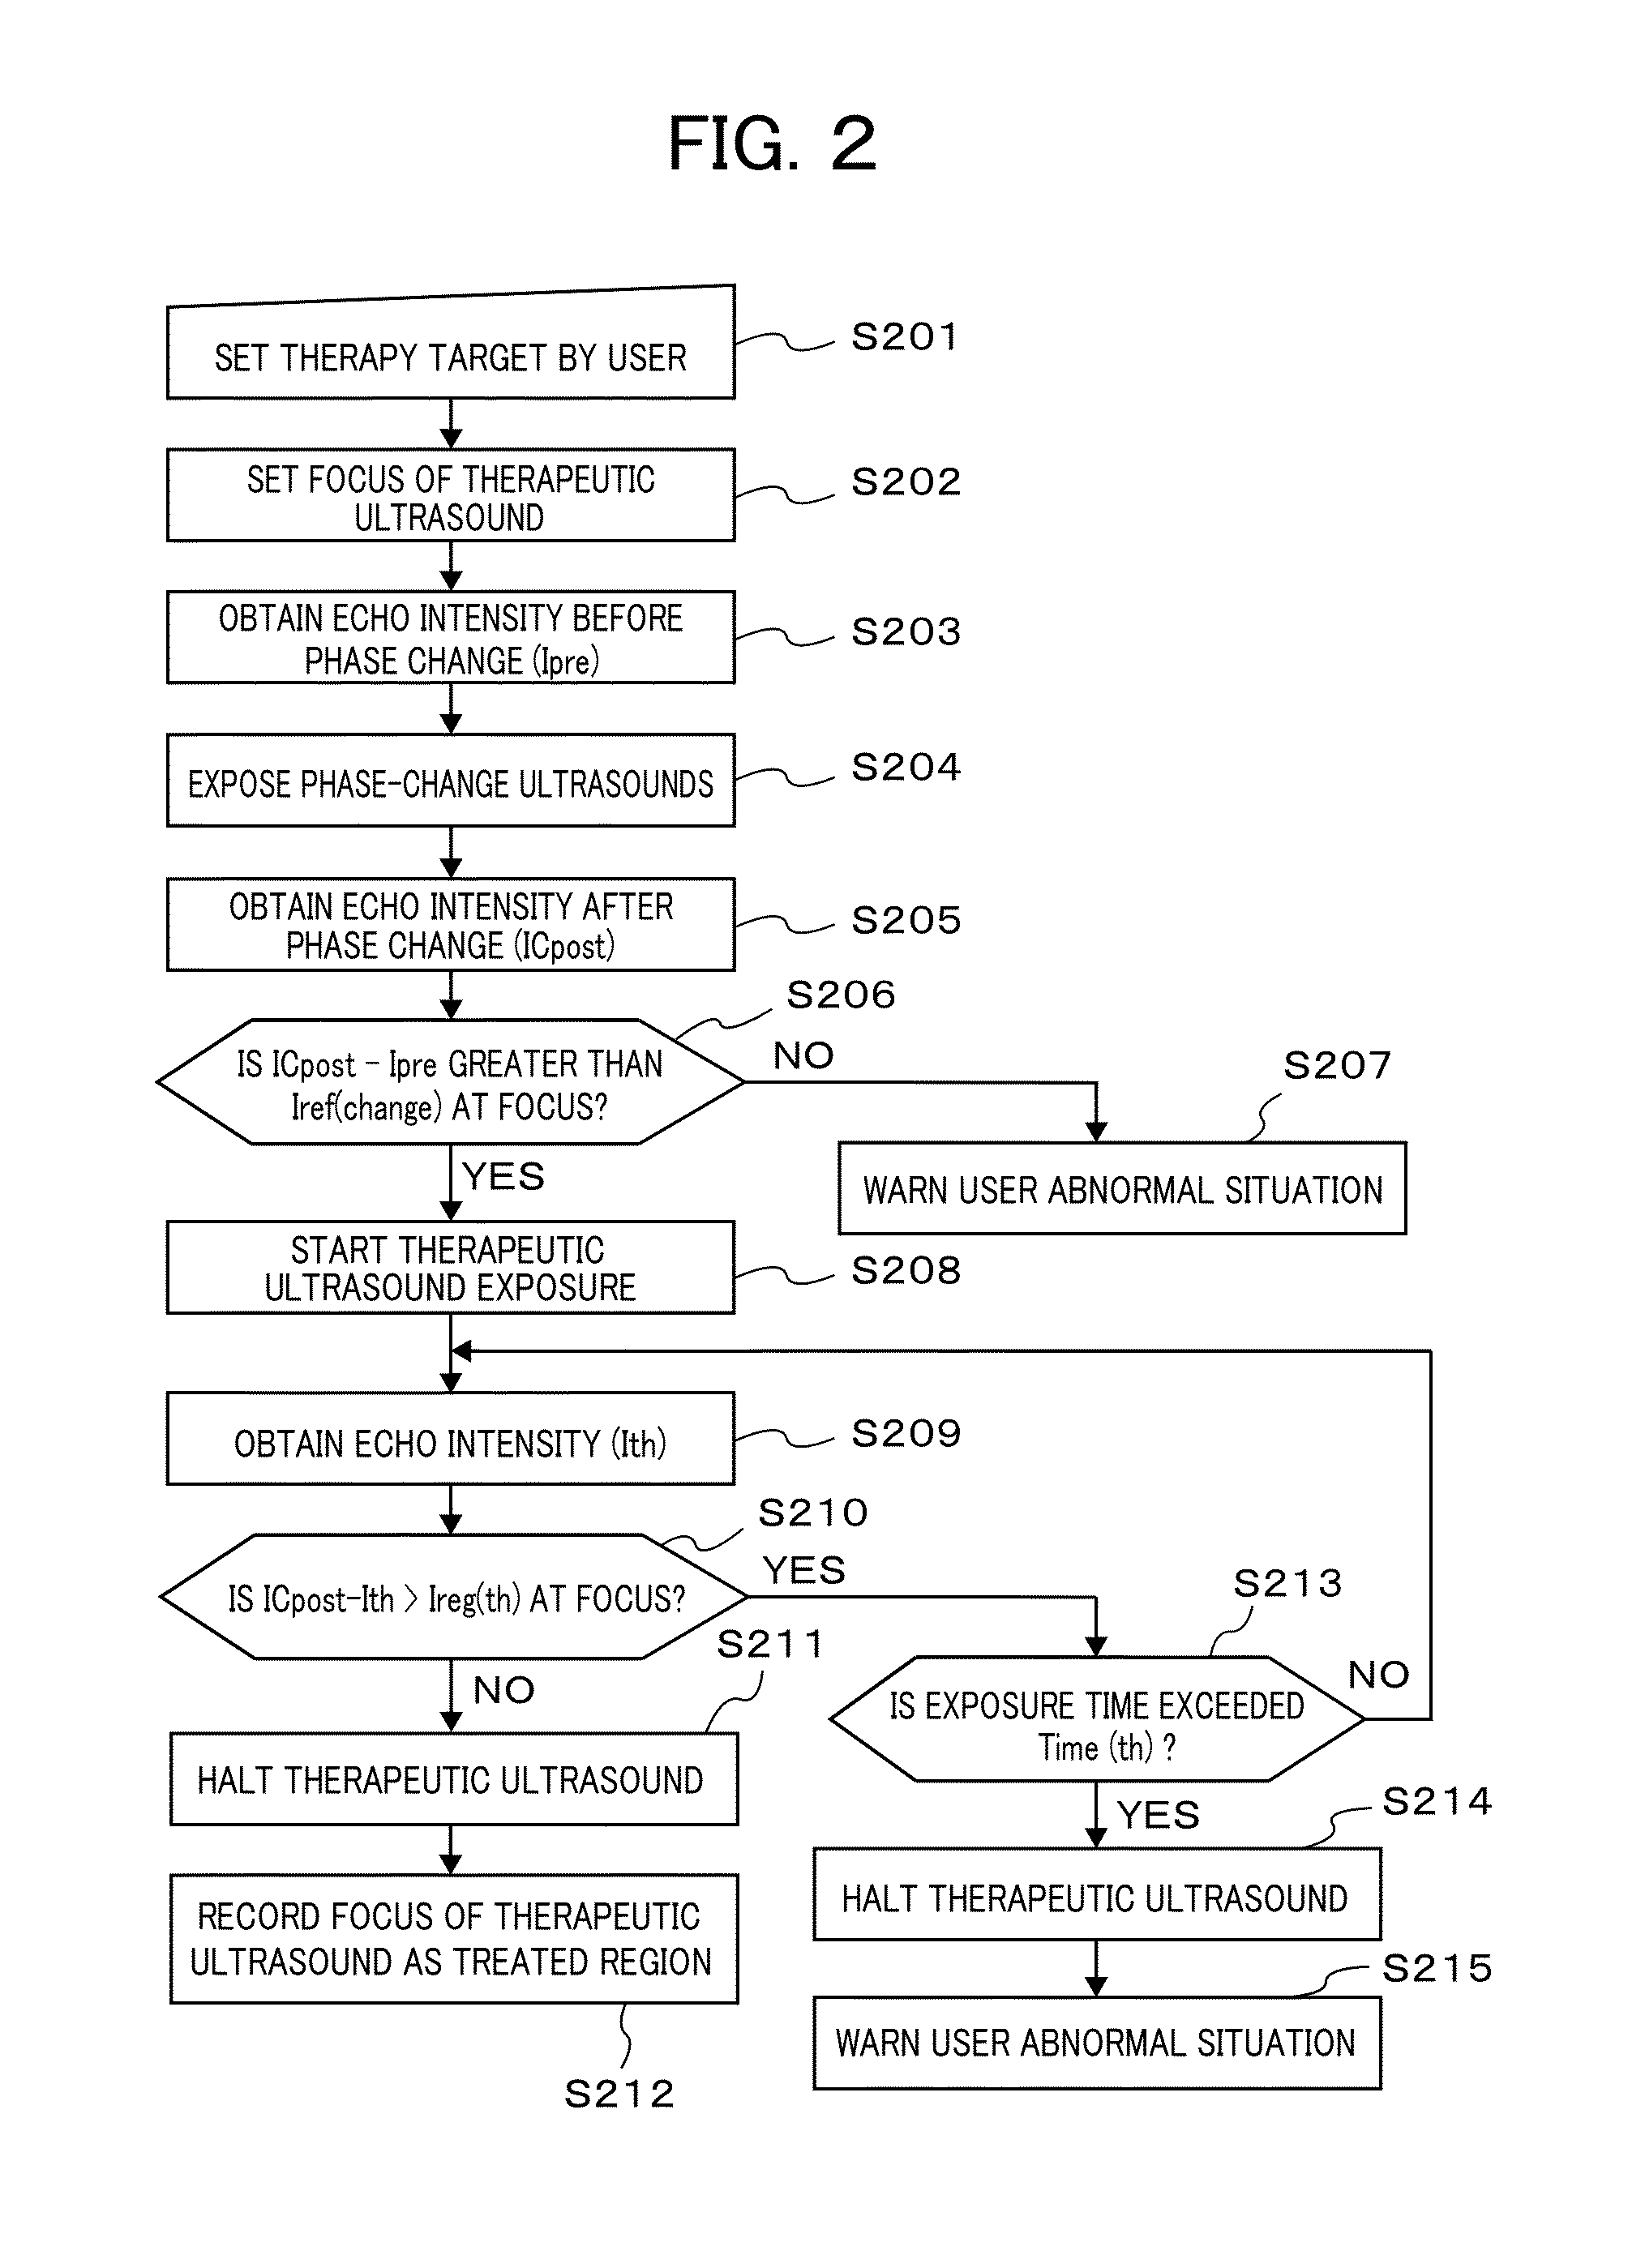 Ultrasound diagnostic and treatment device